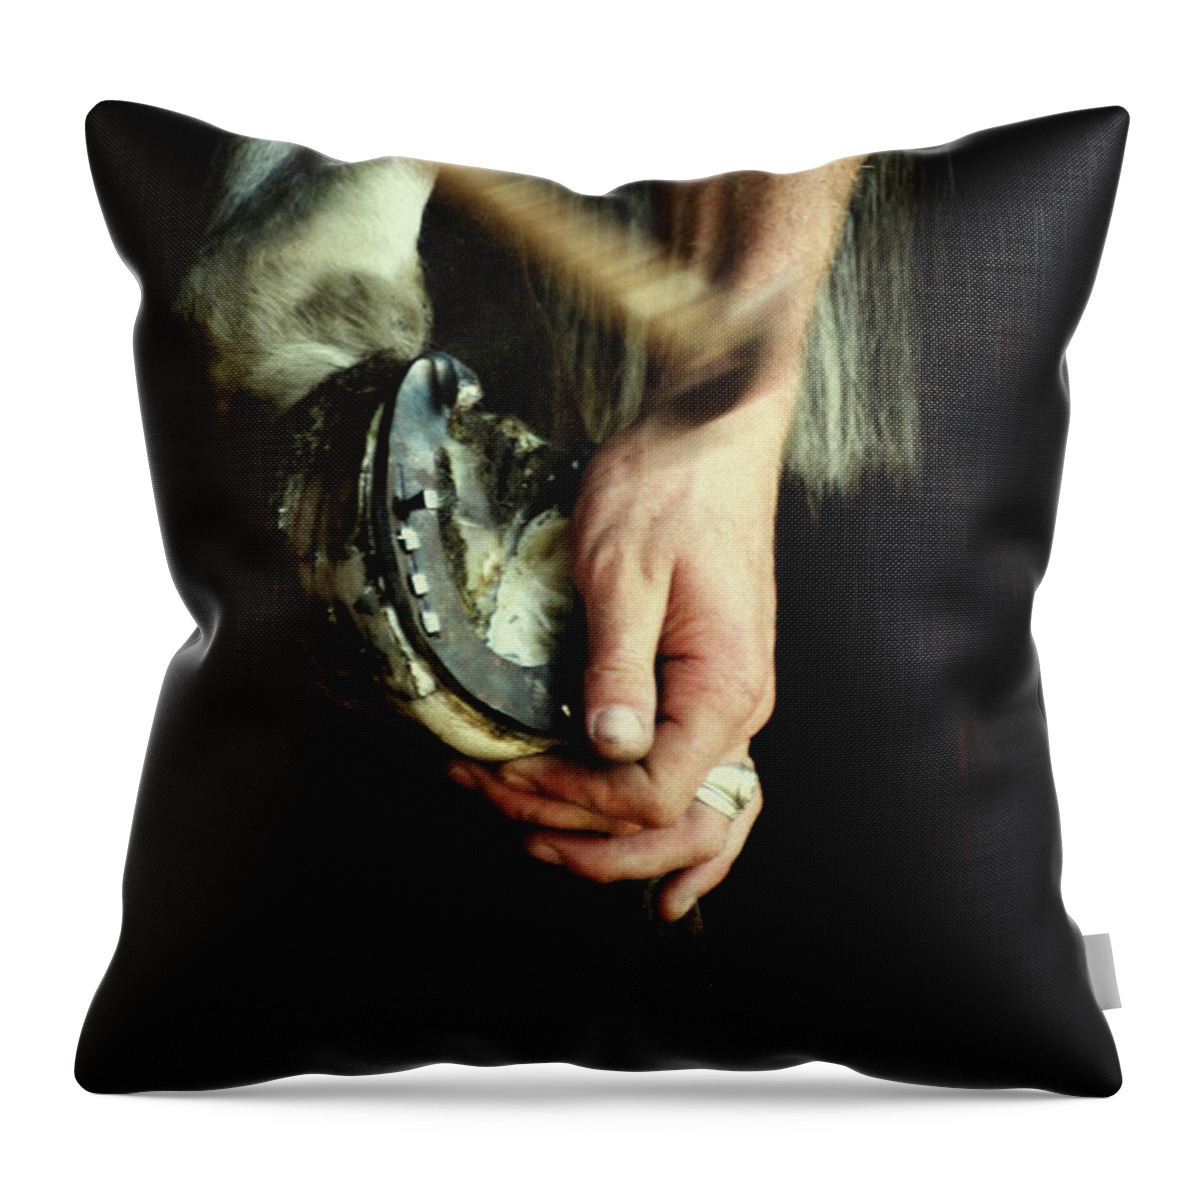 Horse Throw Pillow featuring the photograph Hammering the horseshoe - Horse photography by Dimitar Hristov